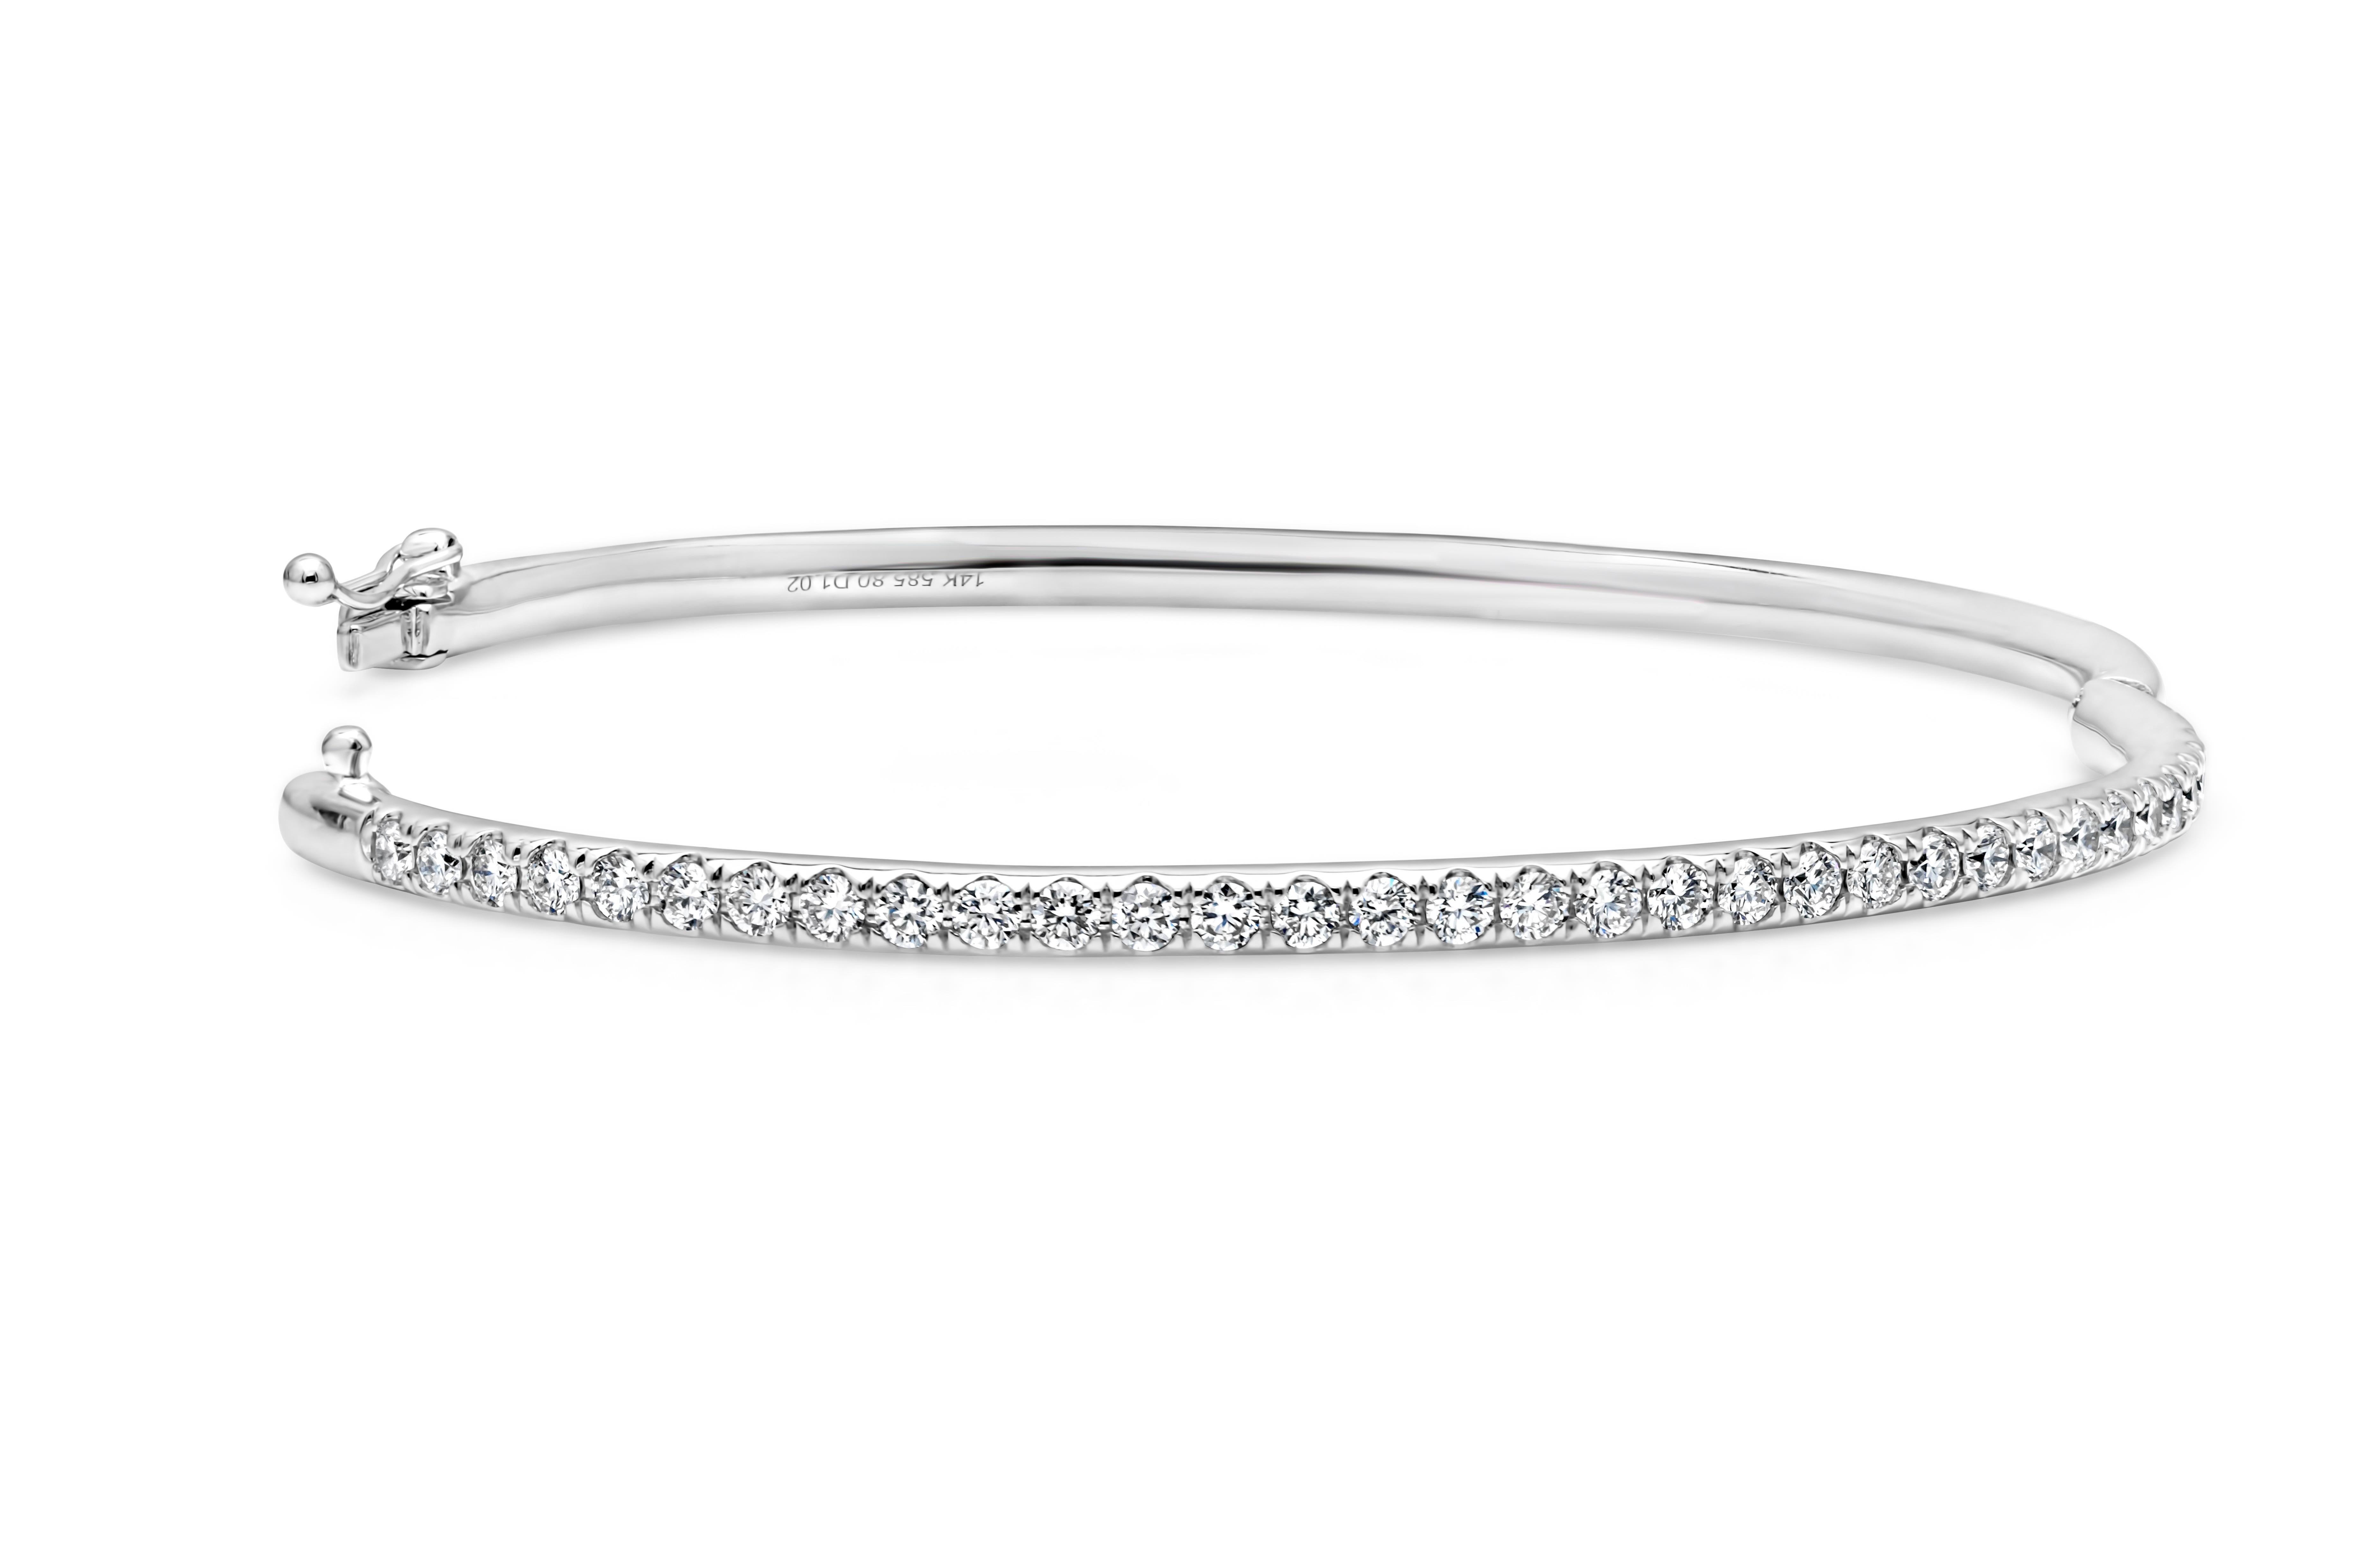 Showcasing a simple but elegant small wrist bangle bracelet set with 32 brilliant round cut diamonds weighing 1.02 carats total, F color and VS in clarity. Has a clasp to slip and wear the bangle securely. Finely made in 14k white gold and 6.50